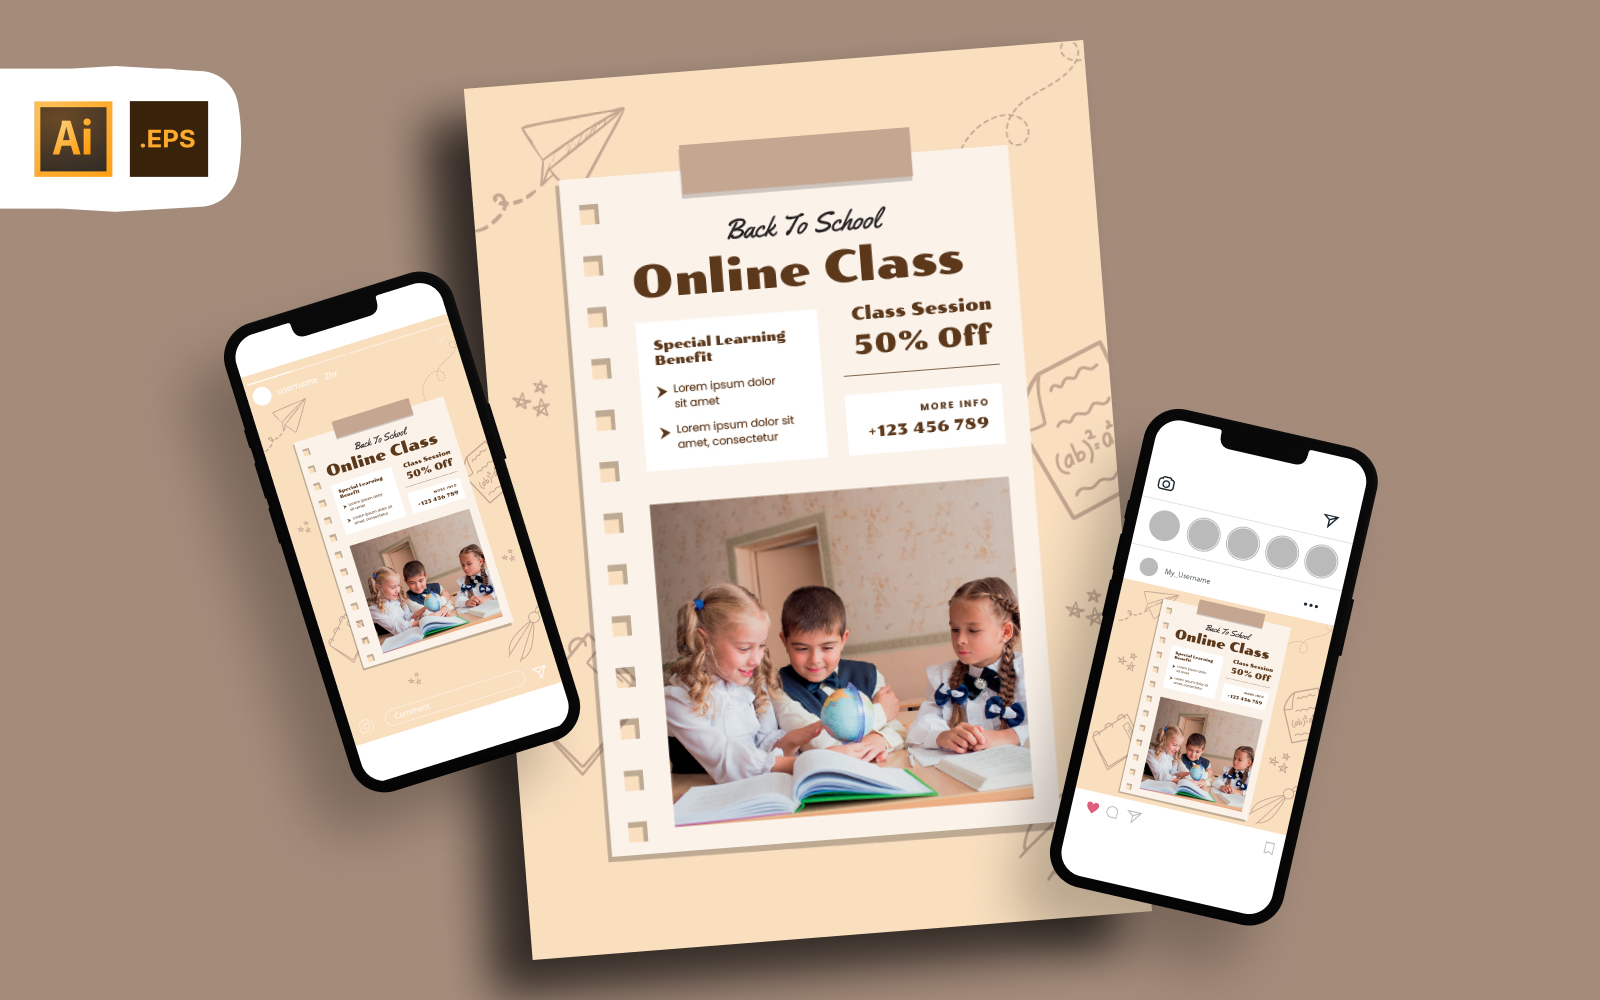 Online Class Admission Promotion Flyer Template